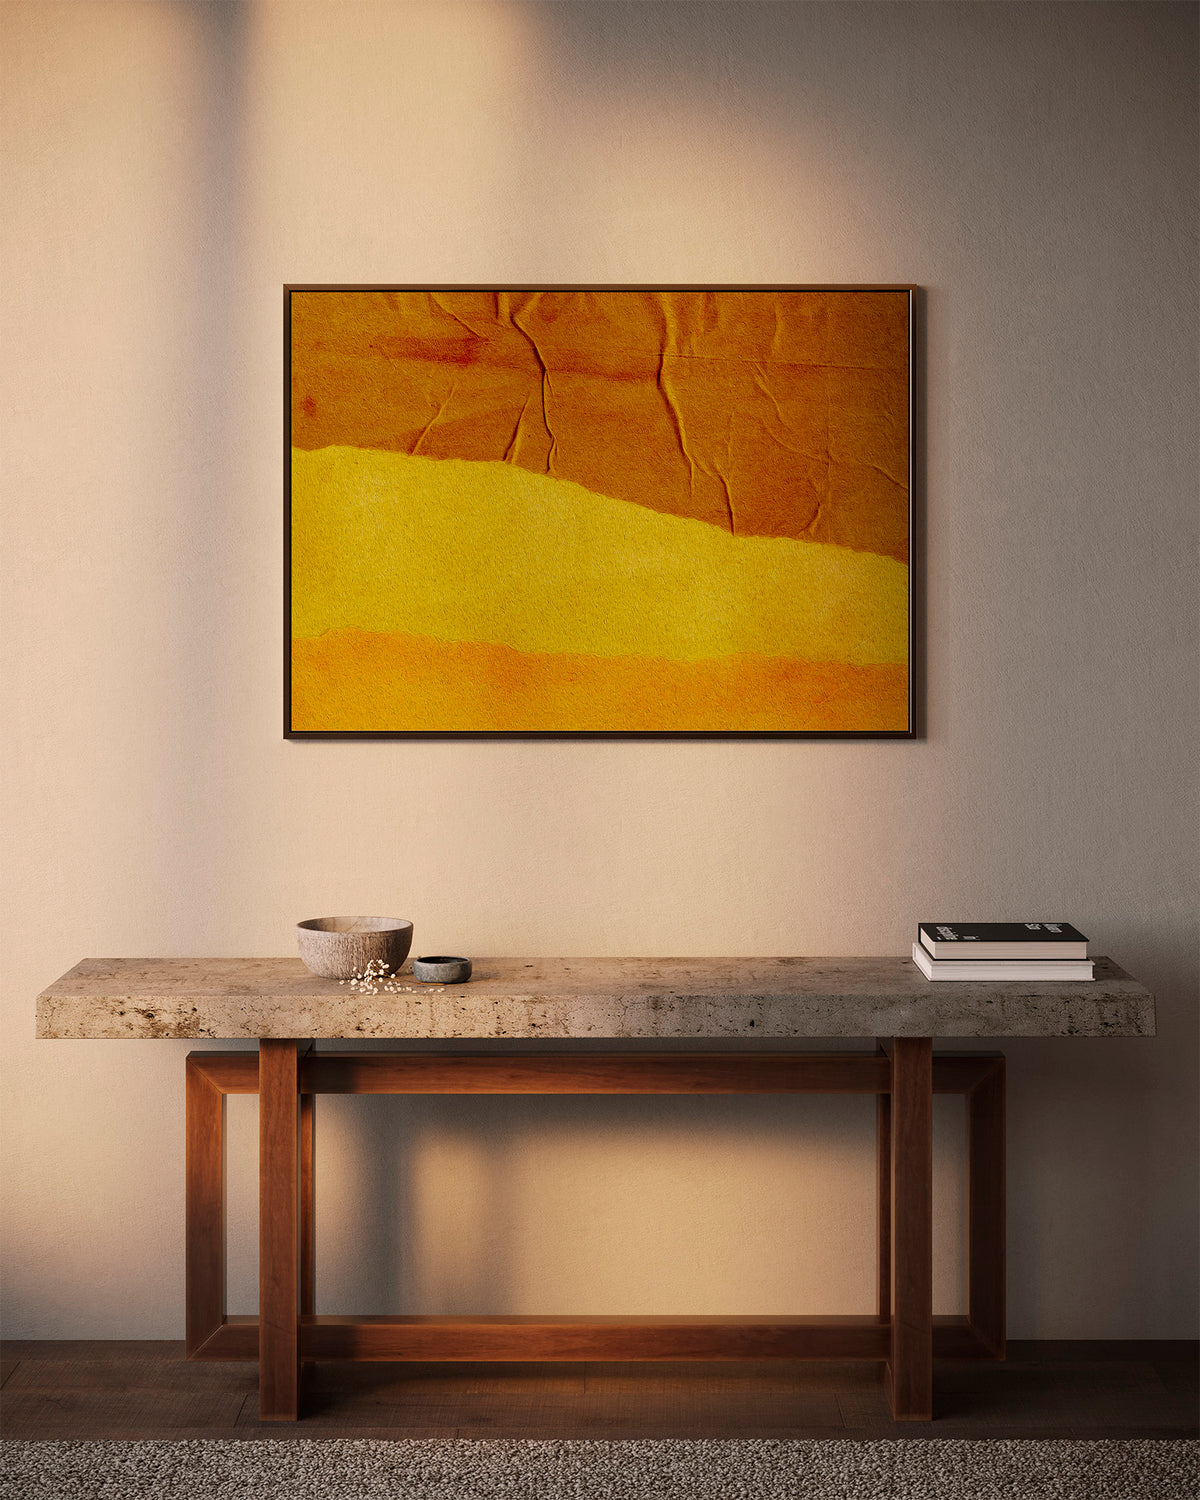 The Tan Yellow Orange Abstract featuring a three color design. The colors simulate rows of different color sand layered next to one another. The wrinkle stimulateS a texture feel on the fibre rag matte finish paper.   NOTES:  Three color abstract  Tan, Yellow, Orange Color  Canson Infinity Platine Fibre Rag  Made to Order Designer: @Makkersmedia FINE ART PRINT DETAILS  Digital file used in the print process Canson Infinity Platine Fibre Rag paper  Matte Finish  Designer: @makkersmedia